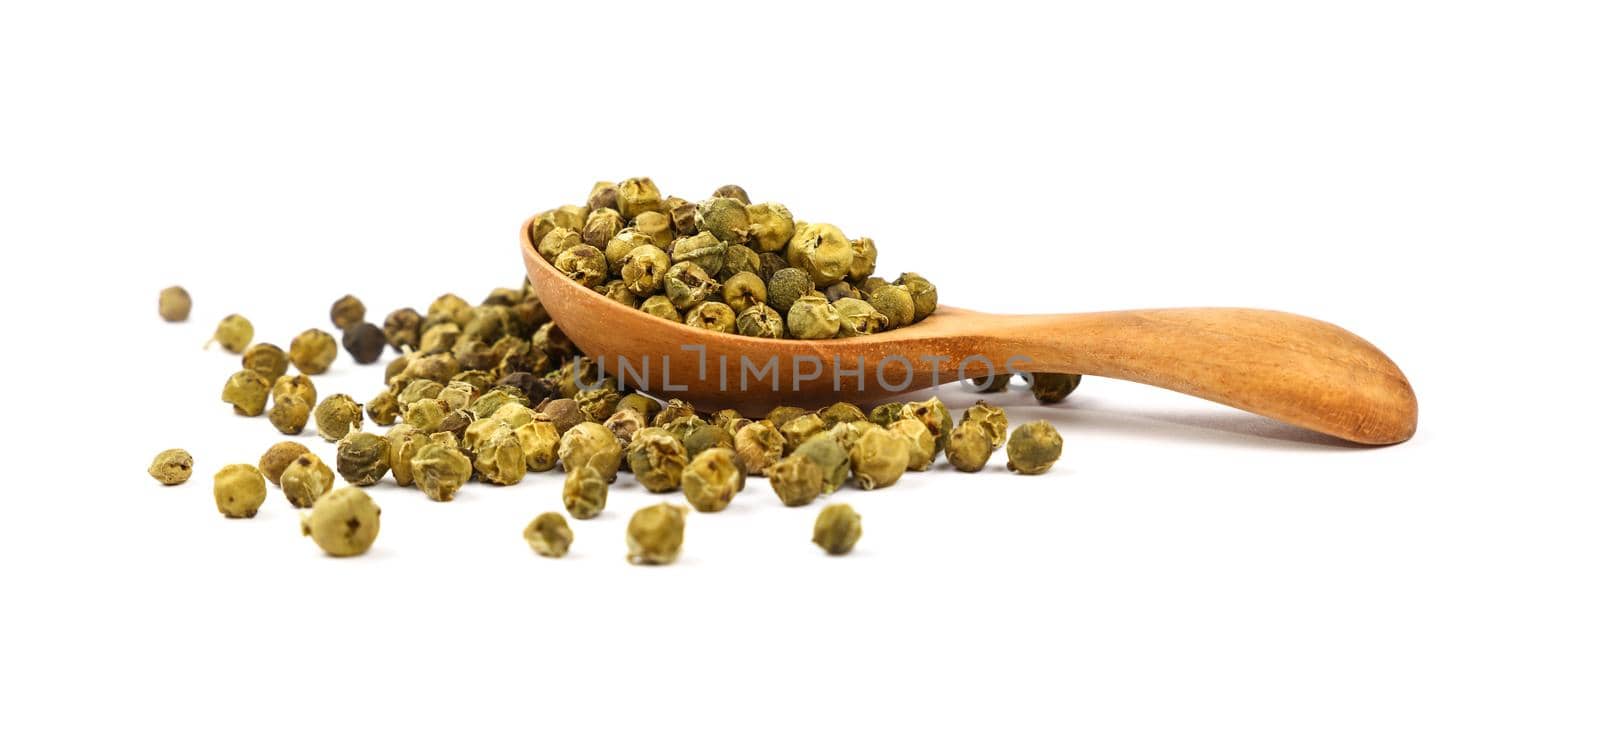 Close up one wooden scoop spoon full of green pepper peppercorns and heap of peppercorns spilled and spread around isolated on white background, low angle, side view